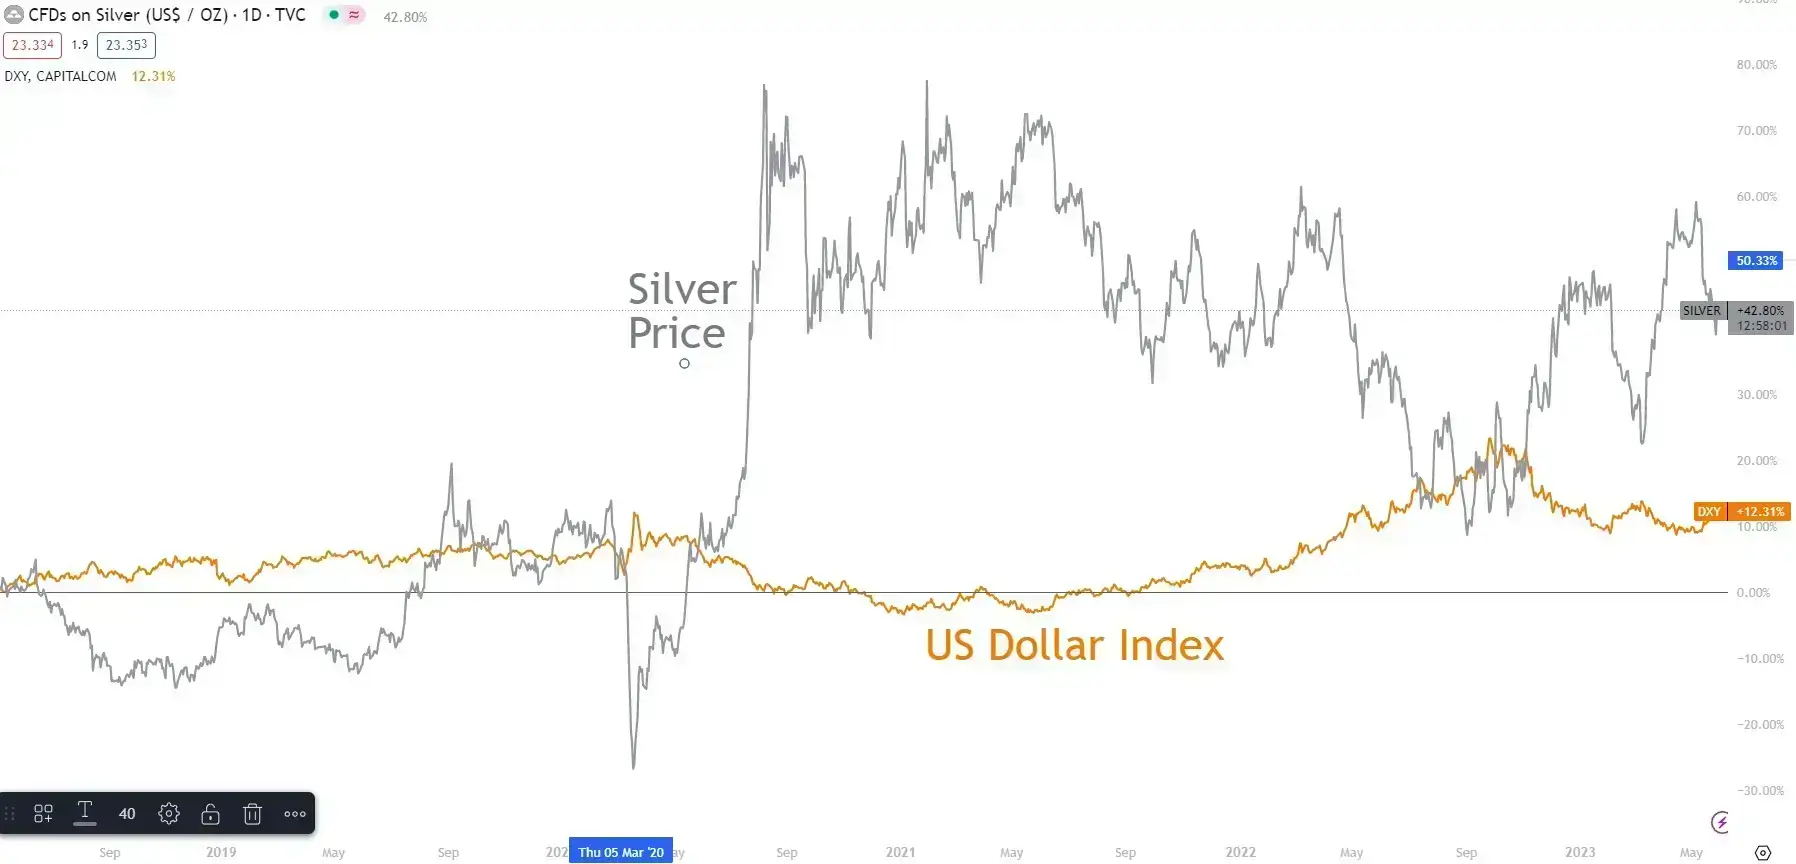 strength-of-silver-price-and-us-dollar